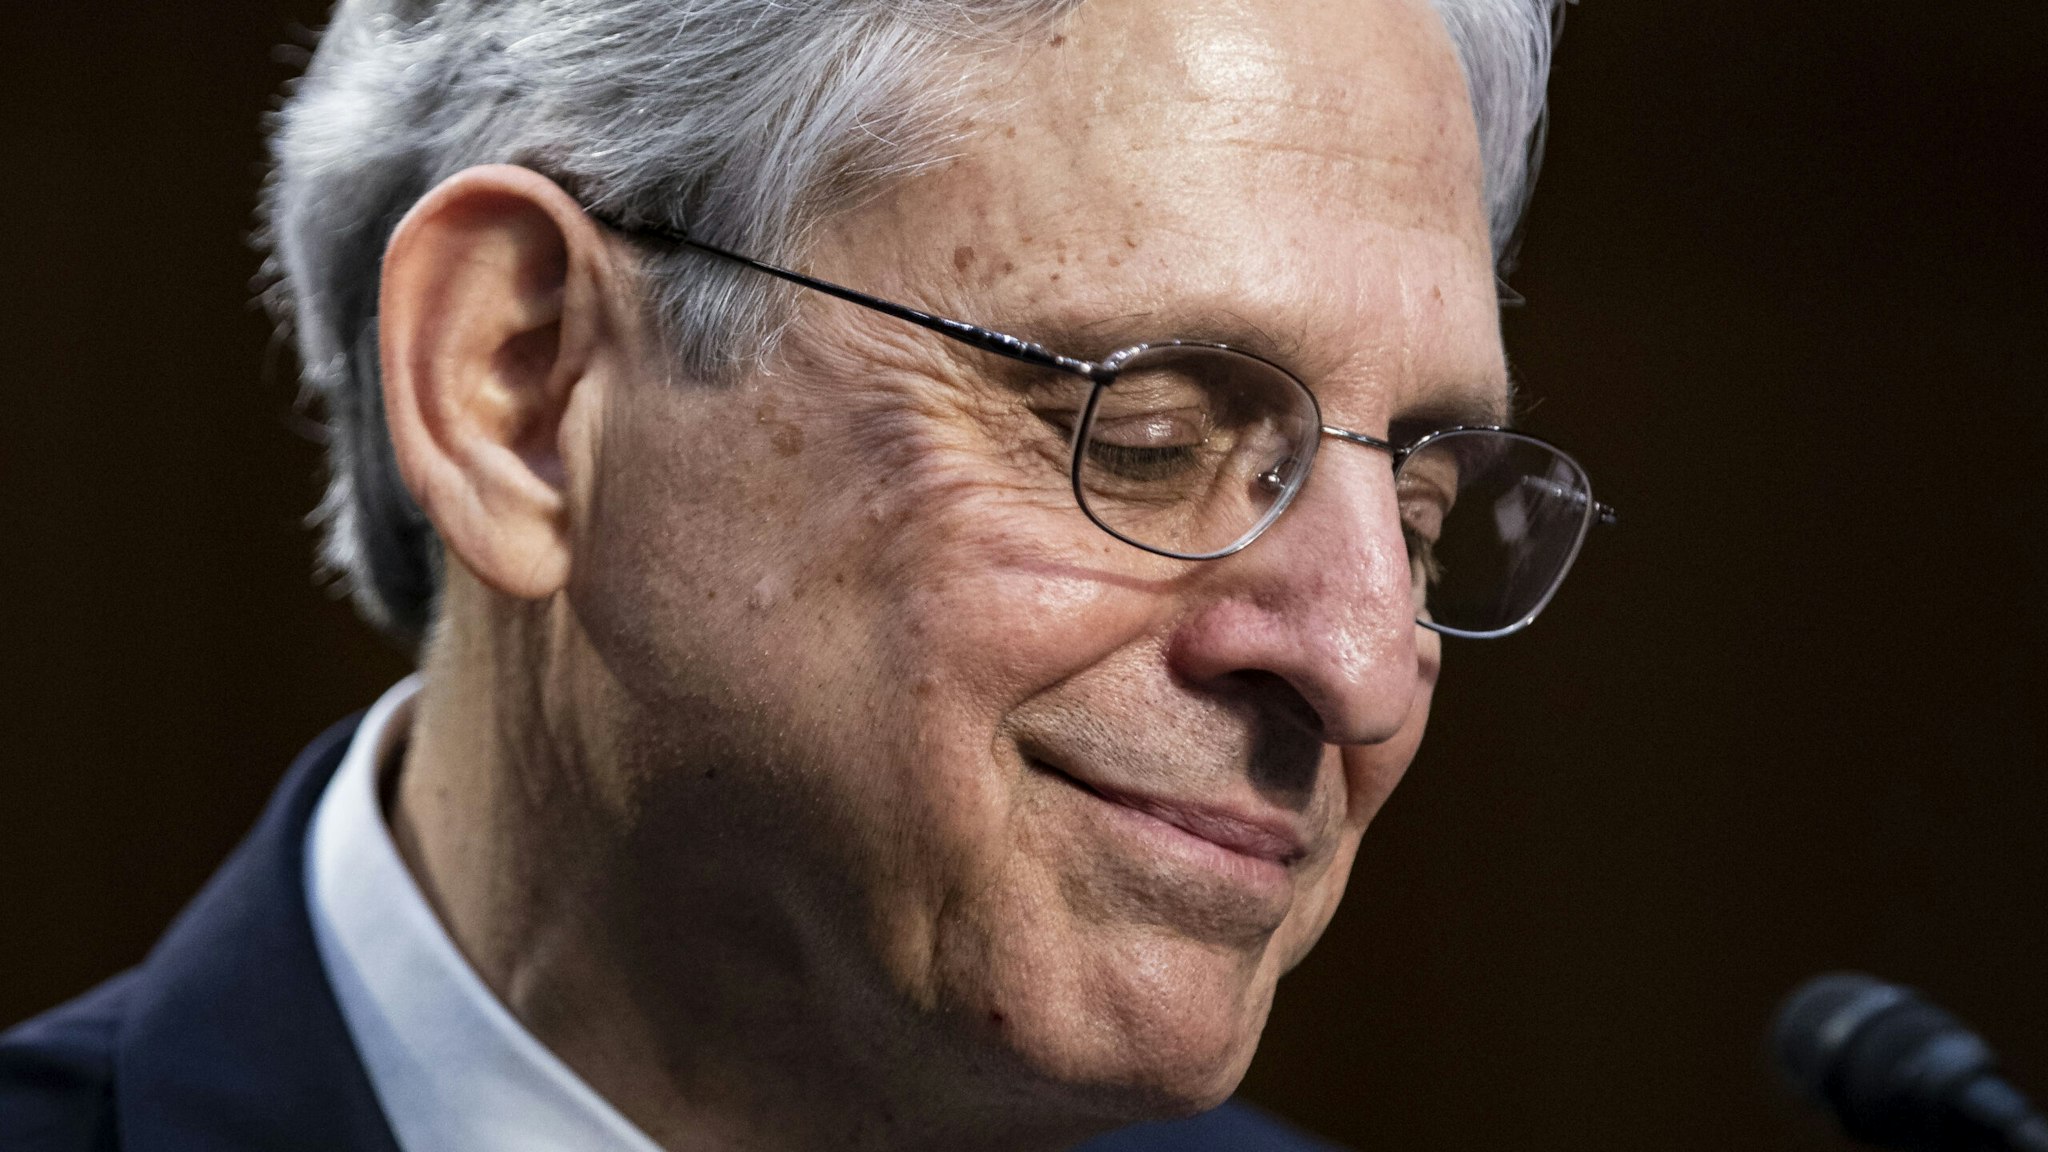 WASHINGTON, DC - FEBRUARY 22: Attorney General nominee Merrick Garland pauses while speaking during his confirmation hearing before the Senate Judiciary Committee in the Hart Senate Office Building on February 22, 2021 in Washington, DC. Garland previously served at the Chief Judge for the U.S. Court of Appeals for the District of Columbia Circuit.